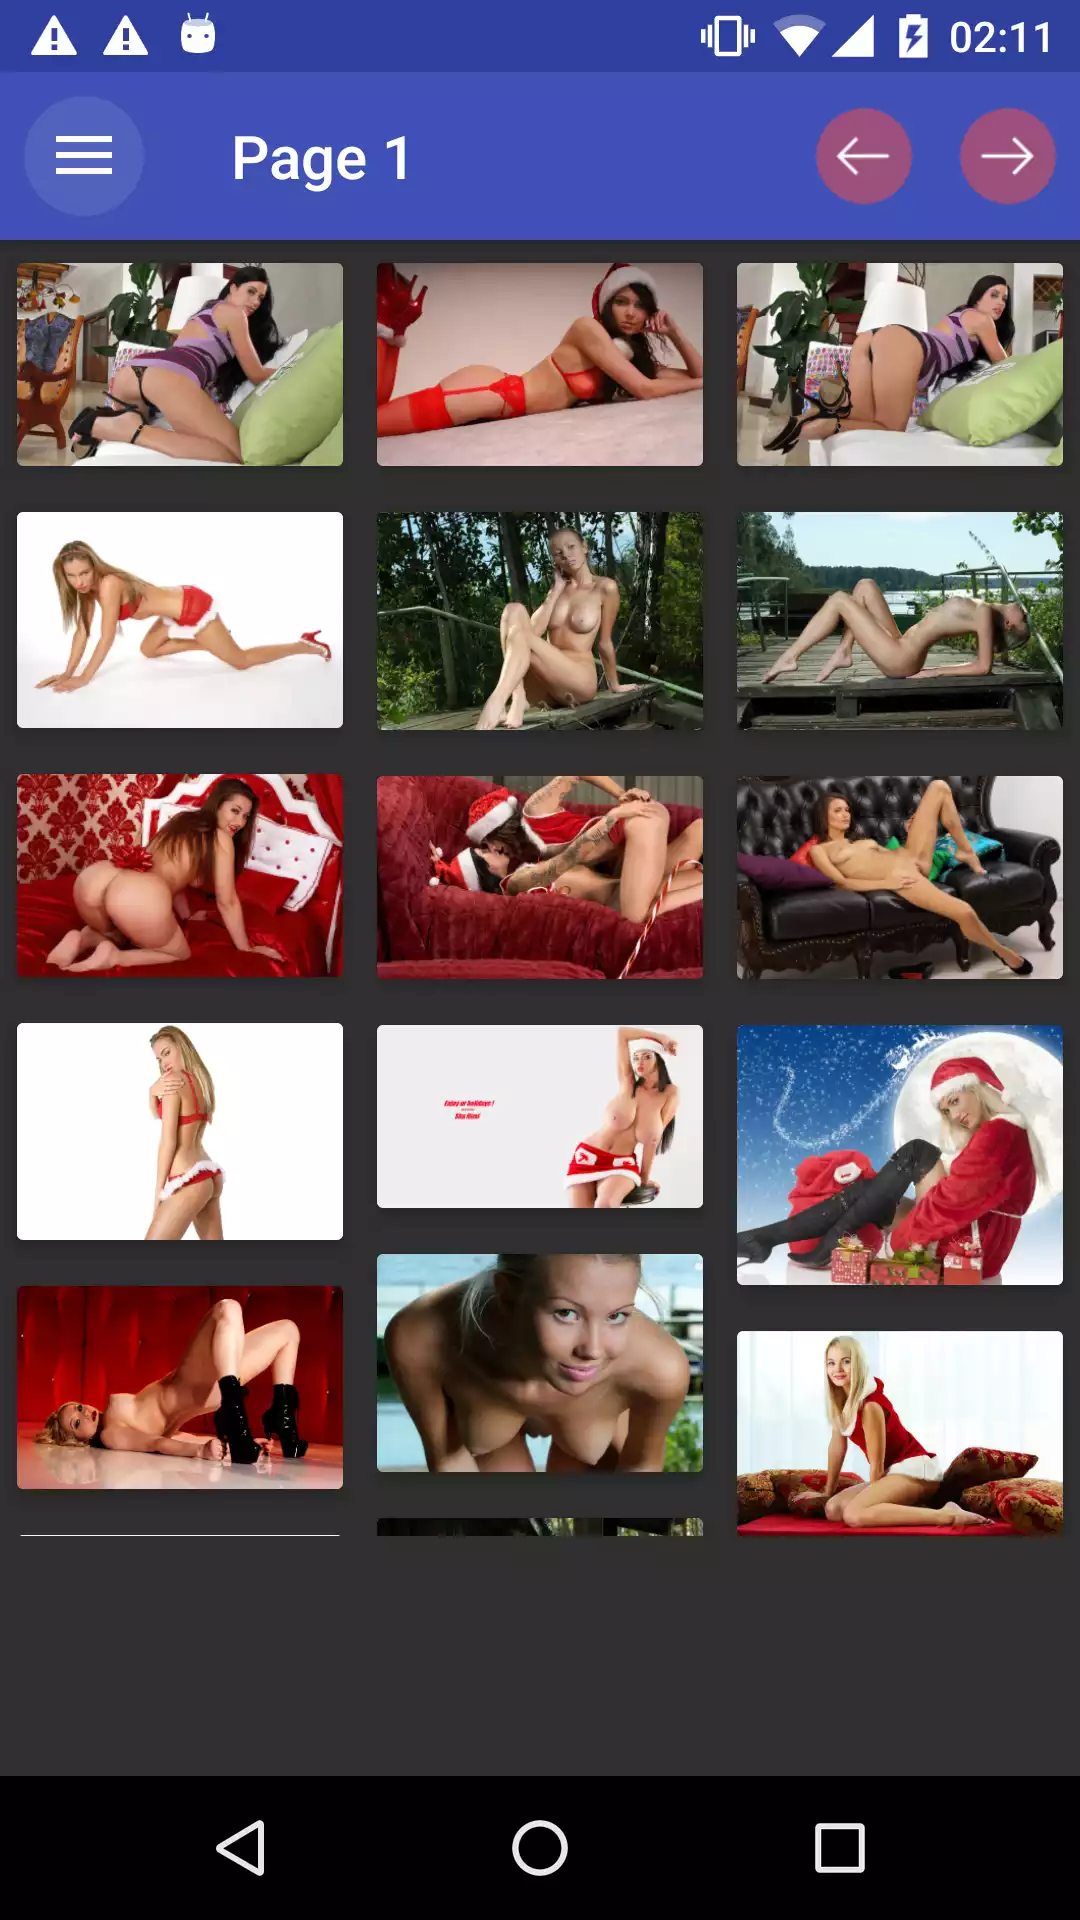 xxx-holidays pic,eroticwallpapers,best,offline,wallpapers,lisa,ann,picw,hentsi,photos,apps,sexy,apk,android,hentai,app,adult,pictures,cuckhold,download,backgrounds,gallery